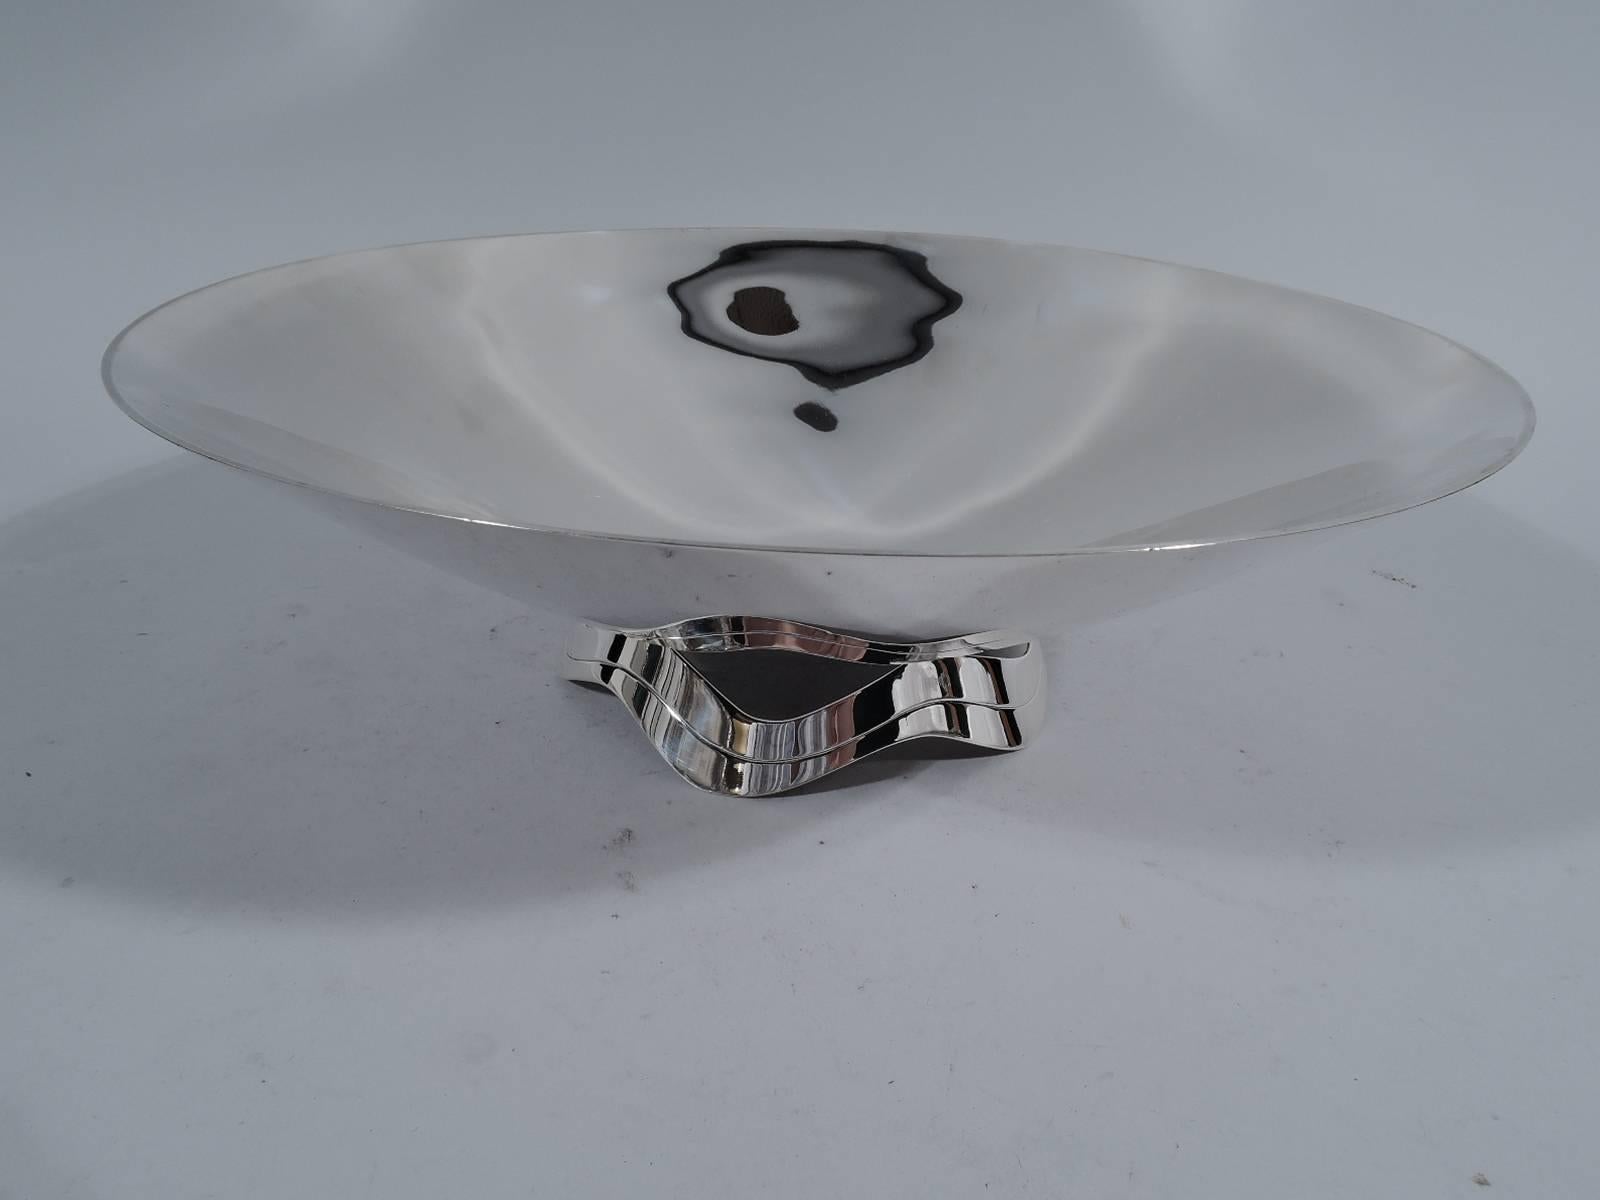 Mid-Century Modern sterling silver centrepiece bowl. Made by Tiffany & Co. in New York. Shallow bowl mounted to scrolled and open ribbon support. The support is reflected in the bowl - a witty example of reflection as a design element. Hallmark